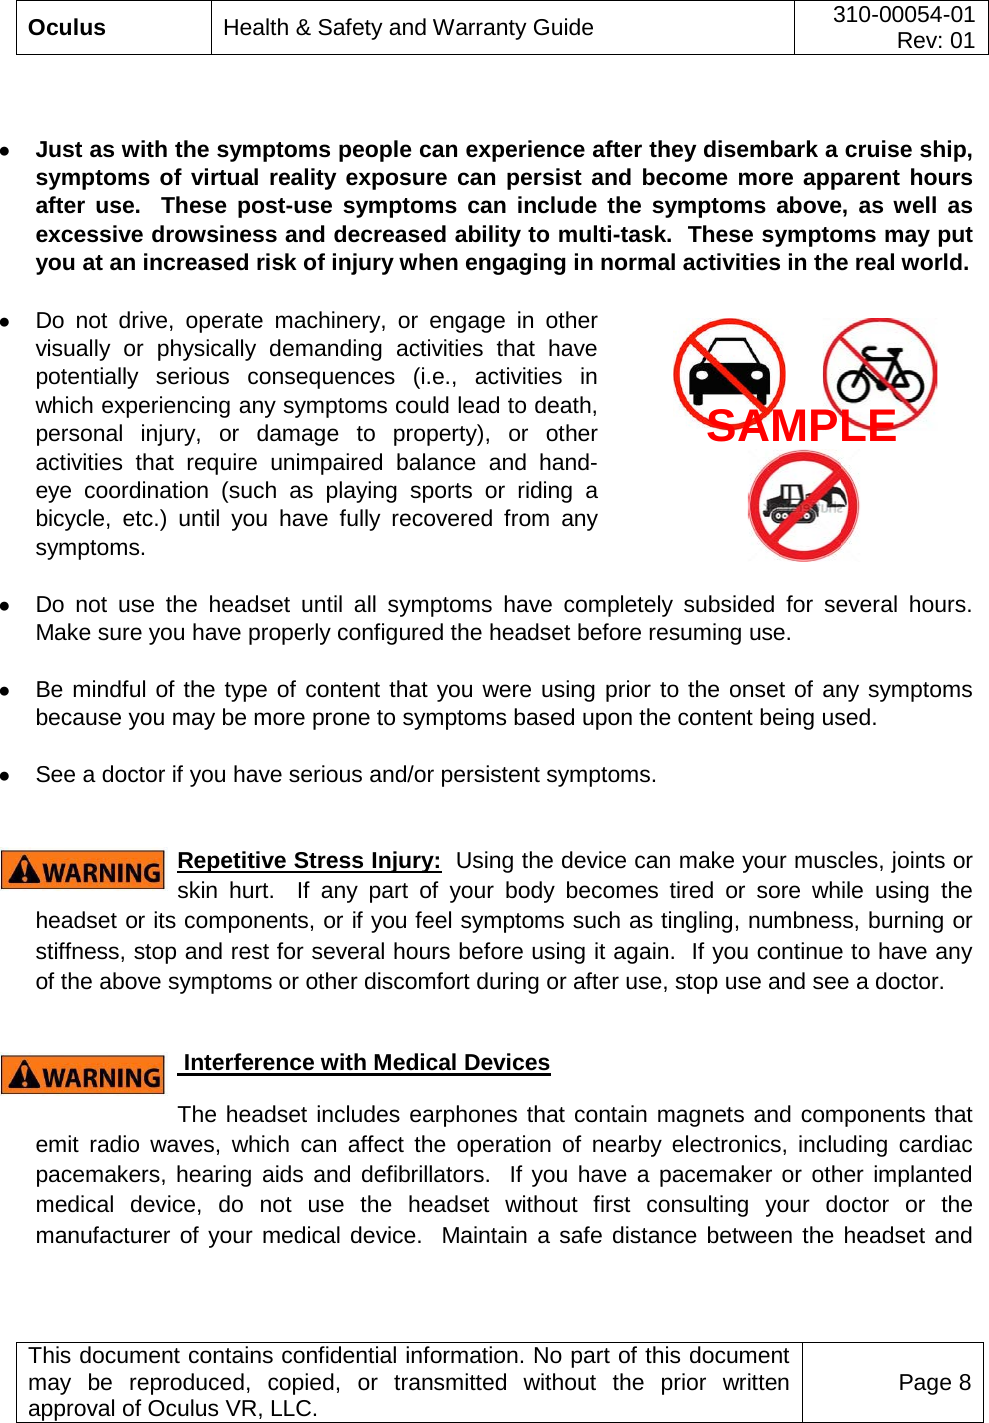  Oculus Health &amp; Safety and Warranty Guide 310-00054-01  Rev: 01   This document contains confidential information. No part of this document may be reproduced, copied, or transmitted without the prior written approval of Oculus VR, LLC. Page 8    ● Just as with the symptoms people can experience after they disembark a cruise ship, symptoms of virtual reality exposure can persist and become more apparent hours after use.  These post-use symptoms can include the symptoms above, as well as excessive drowsiness and decreased ability to multi-task.  These symptoms may put you at an increased risk of injury when engaging in normal activities in the real world.    ● Do not drive, operate machinery, or engage in other visually or physically demanding activities that have potentially serious consequences (i.e., activities in which experiencing any symptoms could lead to death, personal injury, or damage to property), or other activities that require unimpaired balance and hand-eye coordination (such as playing sports or riding a bicycle, etc.) until you have fully recovered from any symptoms.    ● Do not use the headset until all symptoms have completely subsided for several  hours.  Make sure you have properly configured the headset before resuming use.   ● Be mindful of the type of content that you were using prior to the onset of any symptoms because you may be more prone to symptoms based upon the content being used.  ● See a doctor if you have serious and/or persistent symptoms.   Repetitive Stress Injury:  Using the device can make your muscles, joints or skin hurt.  If any part of your body becomes tired or sore while using the headset or its components, or if you feel symptoms such as tingling, numbness, burning or stiffness, stop and rest for several hours before using it again.  If you continue to have any of the above symptoms or other discomfort during or after use, stop use and see a doctor.    Interference with Medical Devices The headset includes earphones that contain magnets and components that emit radio waves, which can affect the operation of nearby electronics, including cardiac pacemakers, hearing aids and defibrillators.  If you have a pacemaker or other implanted medical device, do not use the headset without first consulting your doctor or the manufacturer of your medical device.  Maintain a safe distance between the headset and SAMPLE 